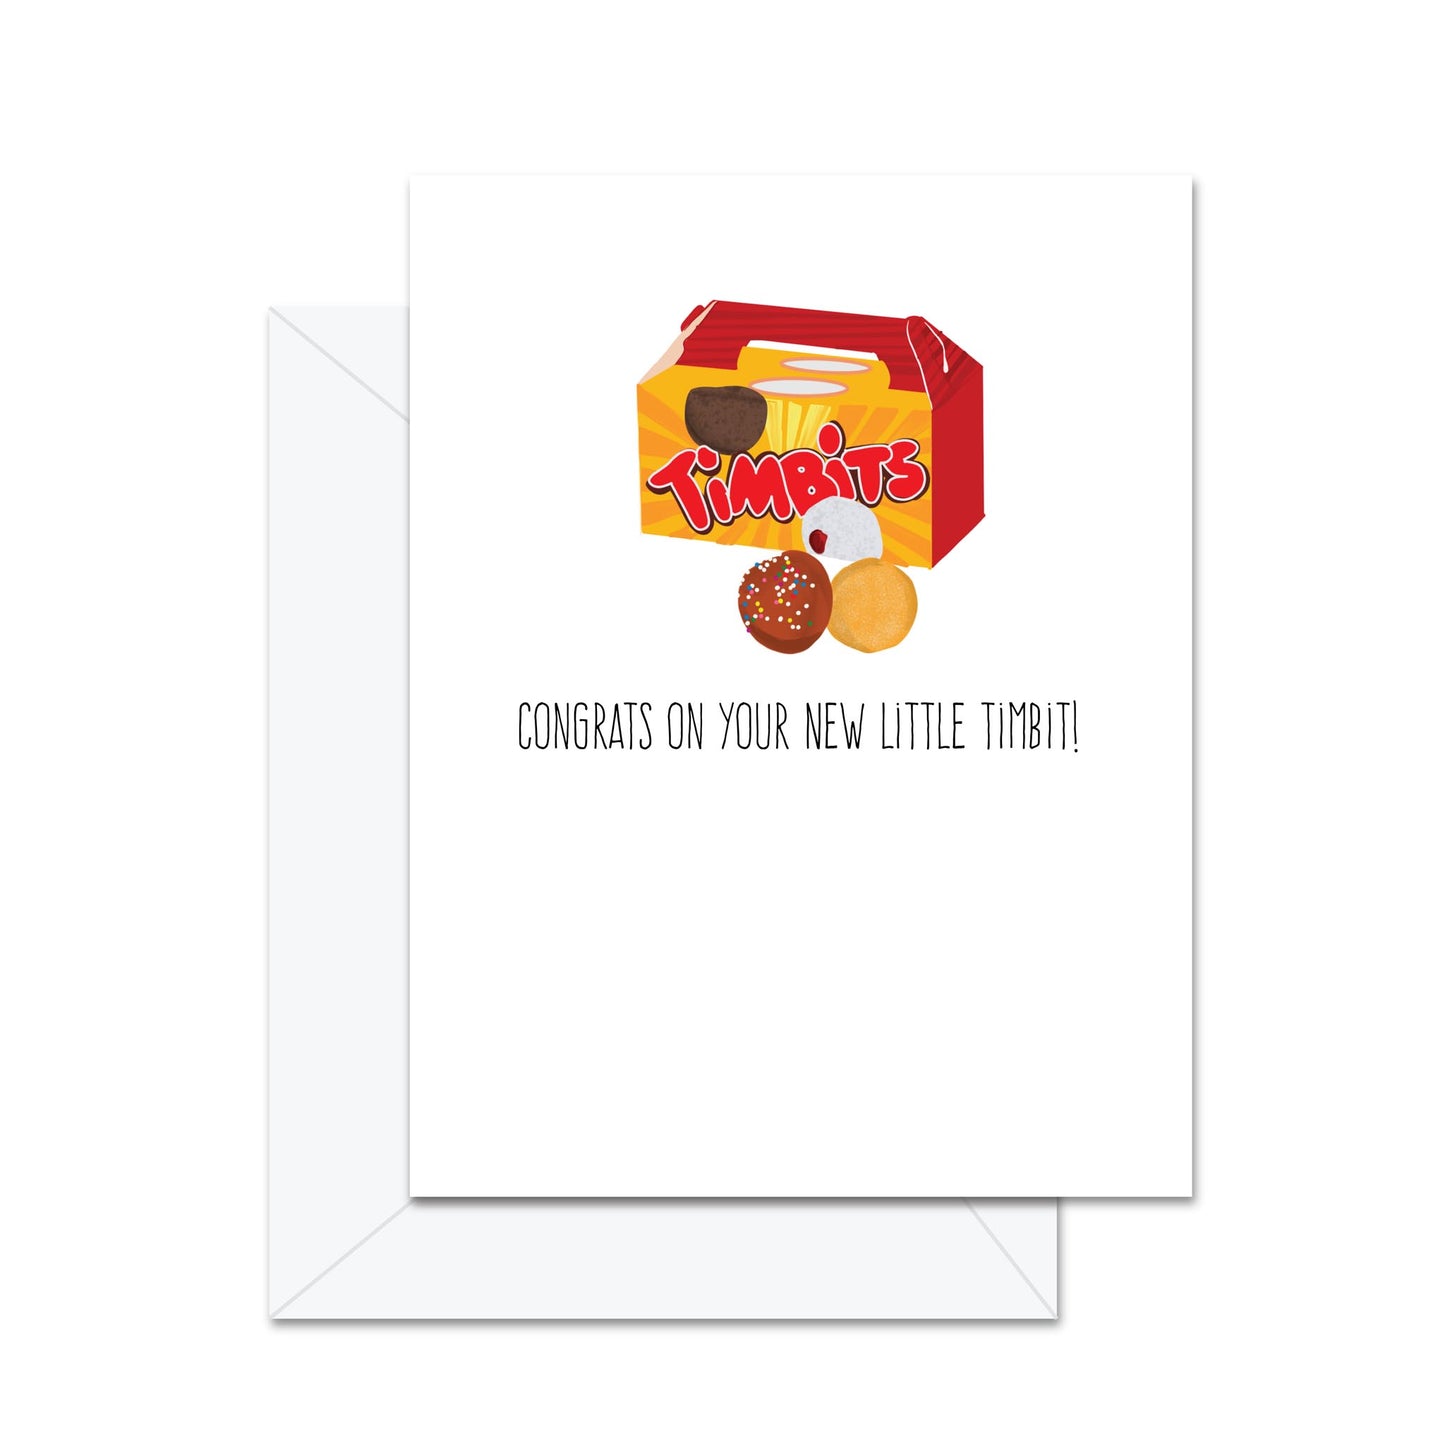 Congrats On Your Little Timbit! - Greeting Card